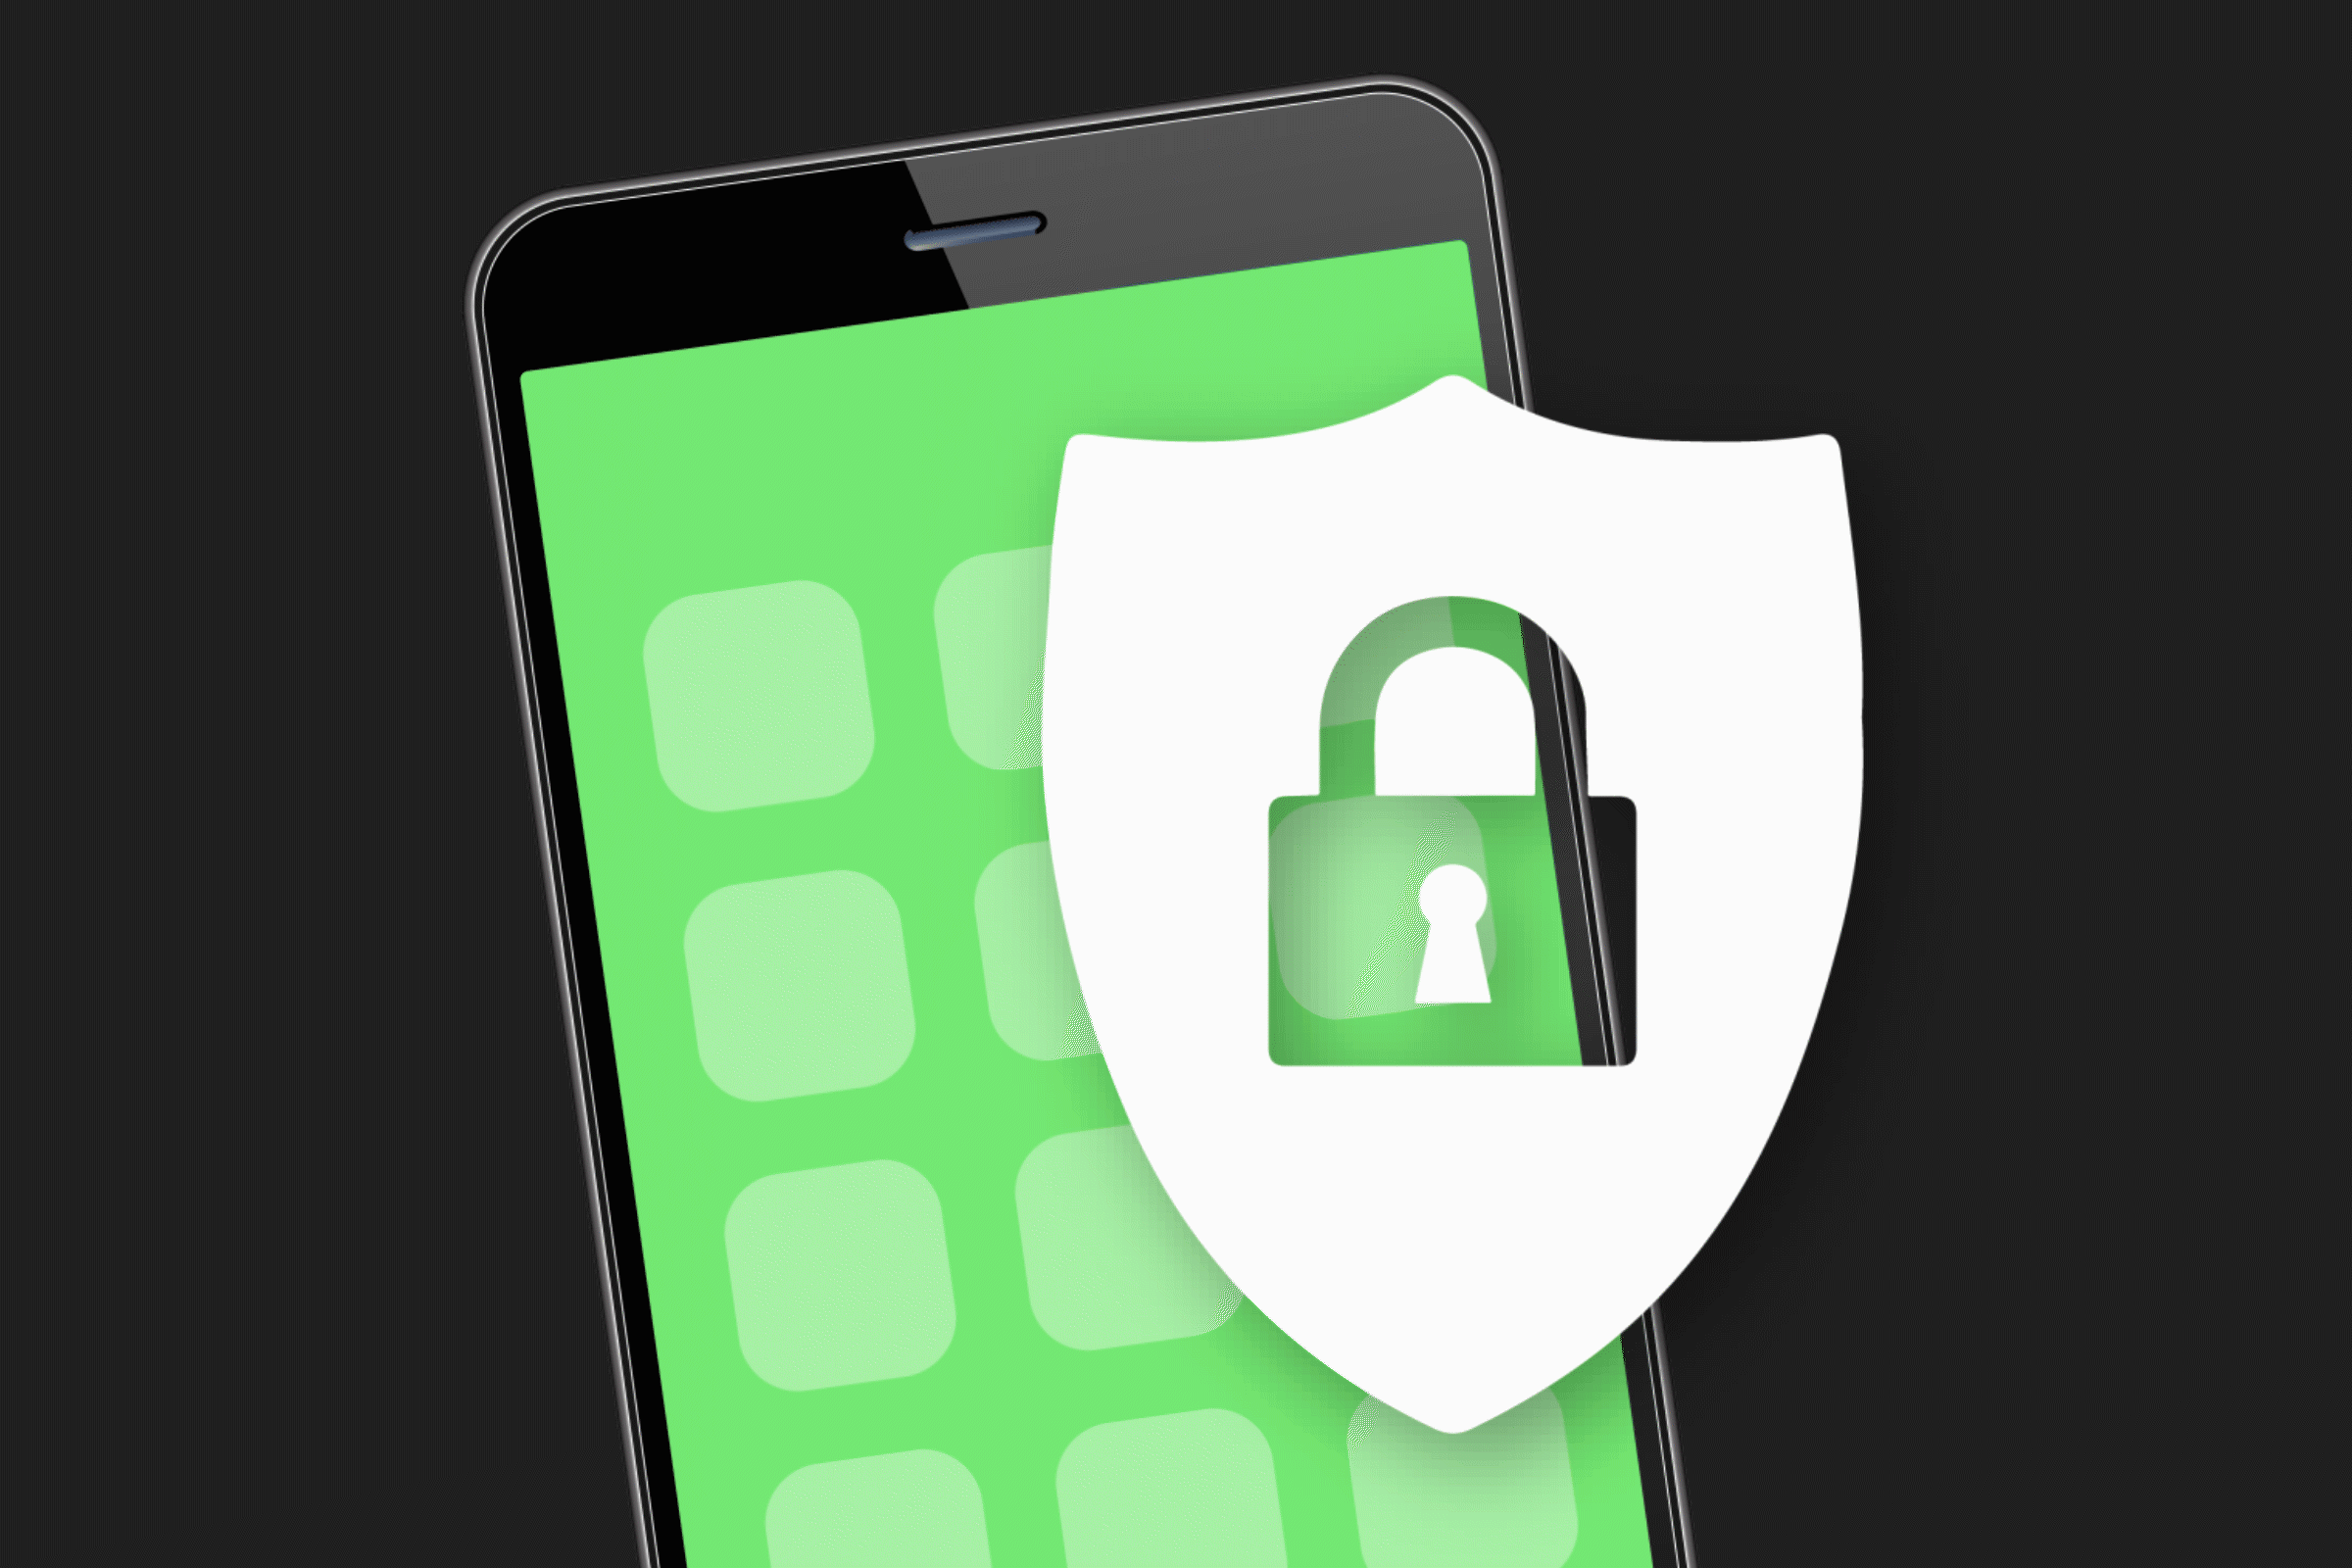 Smartphone Security: Everything You Need to Know to Keep Your Phone Safe